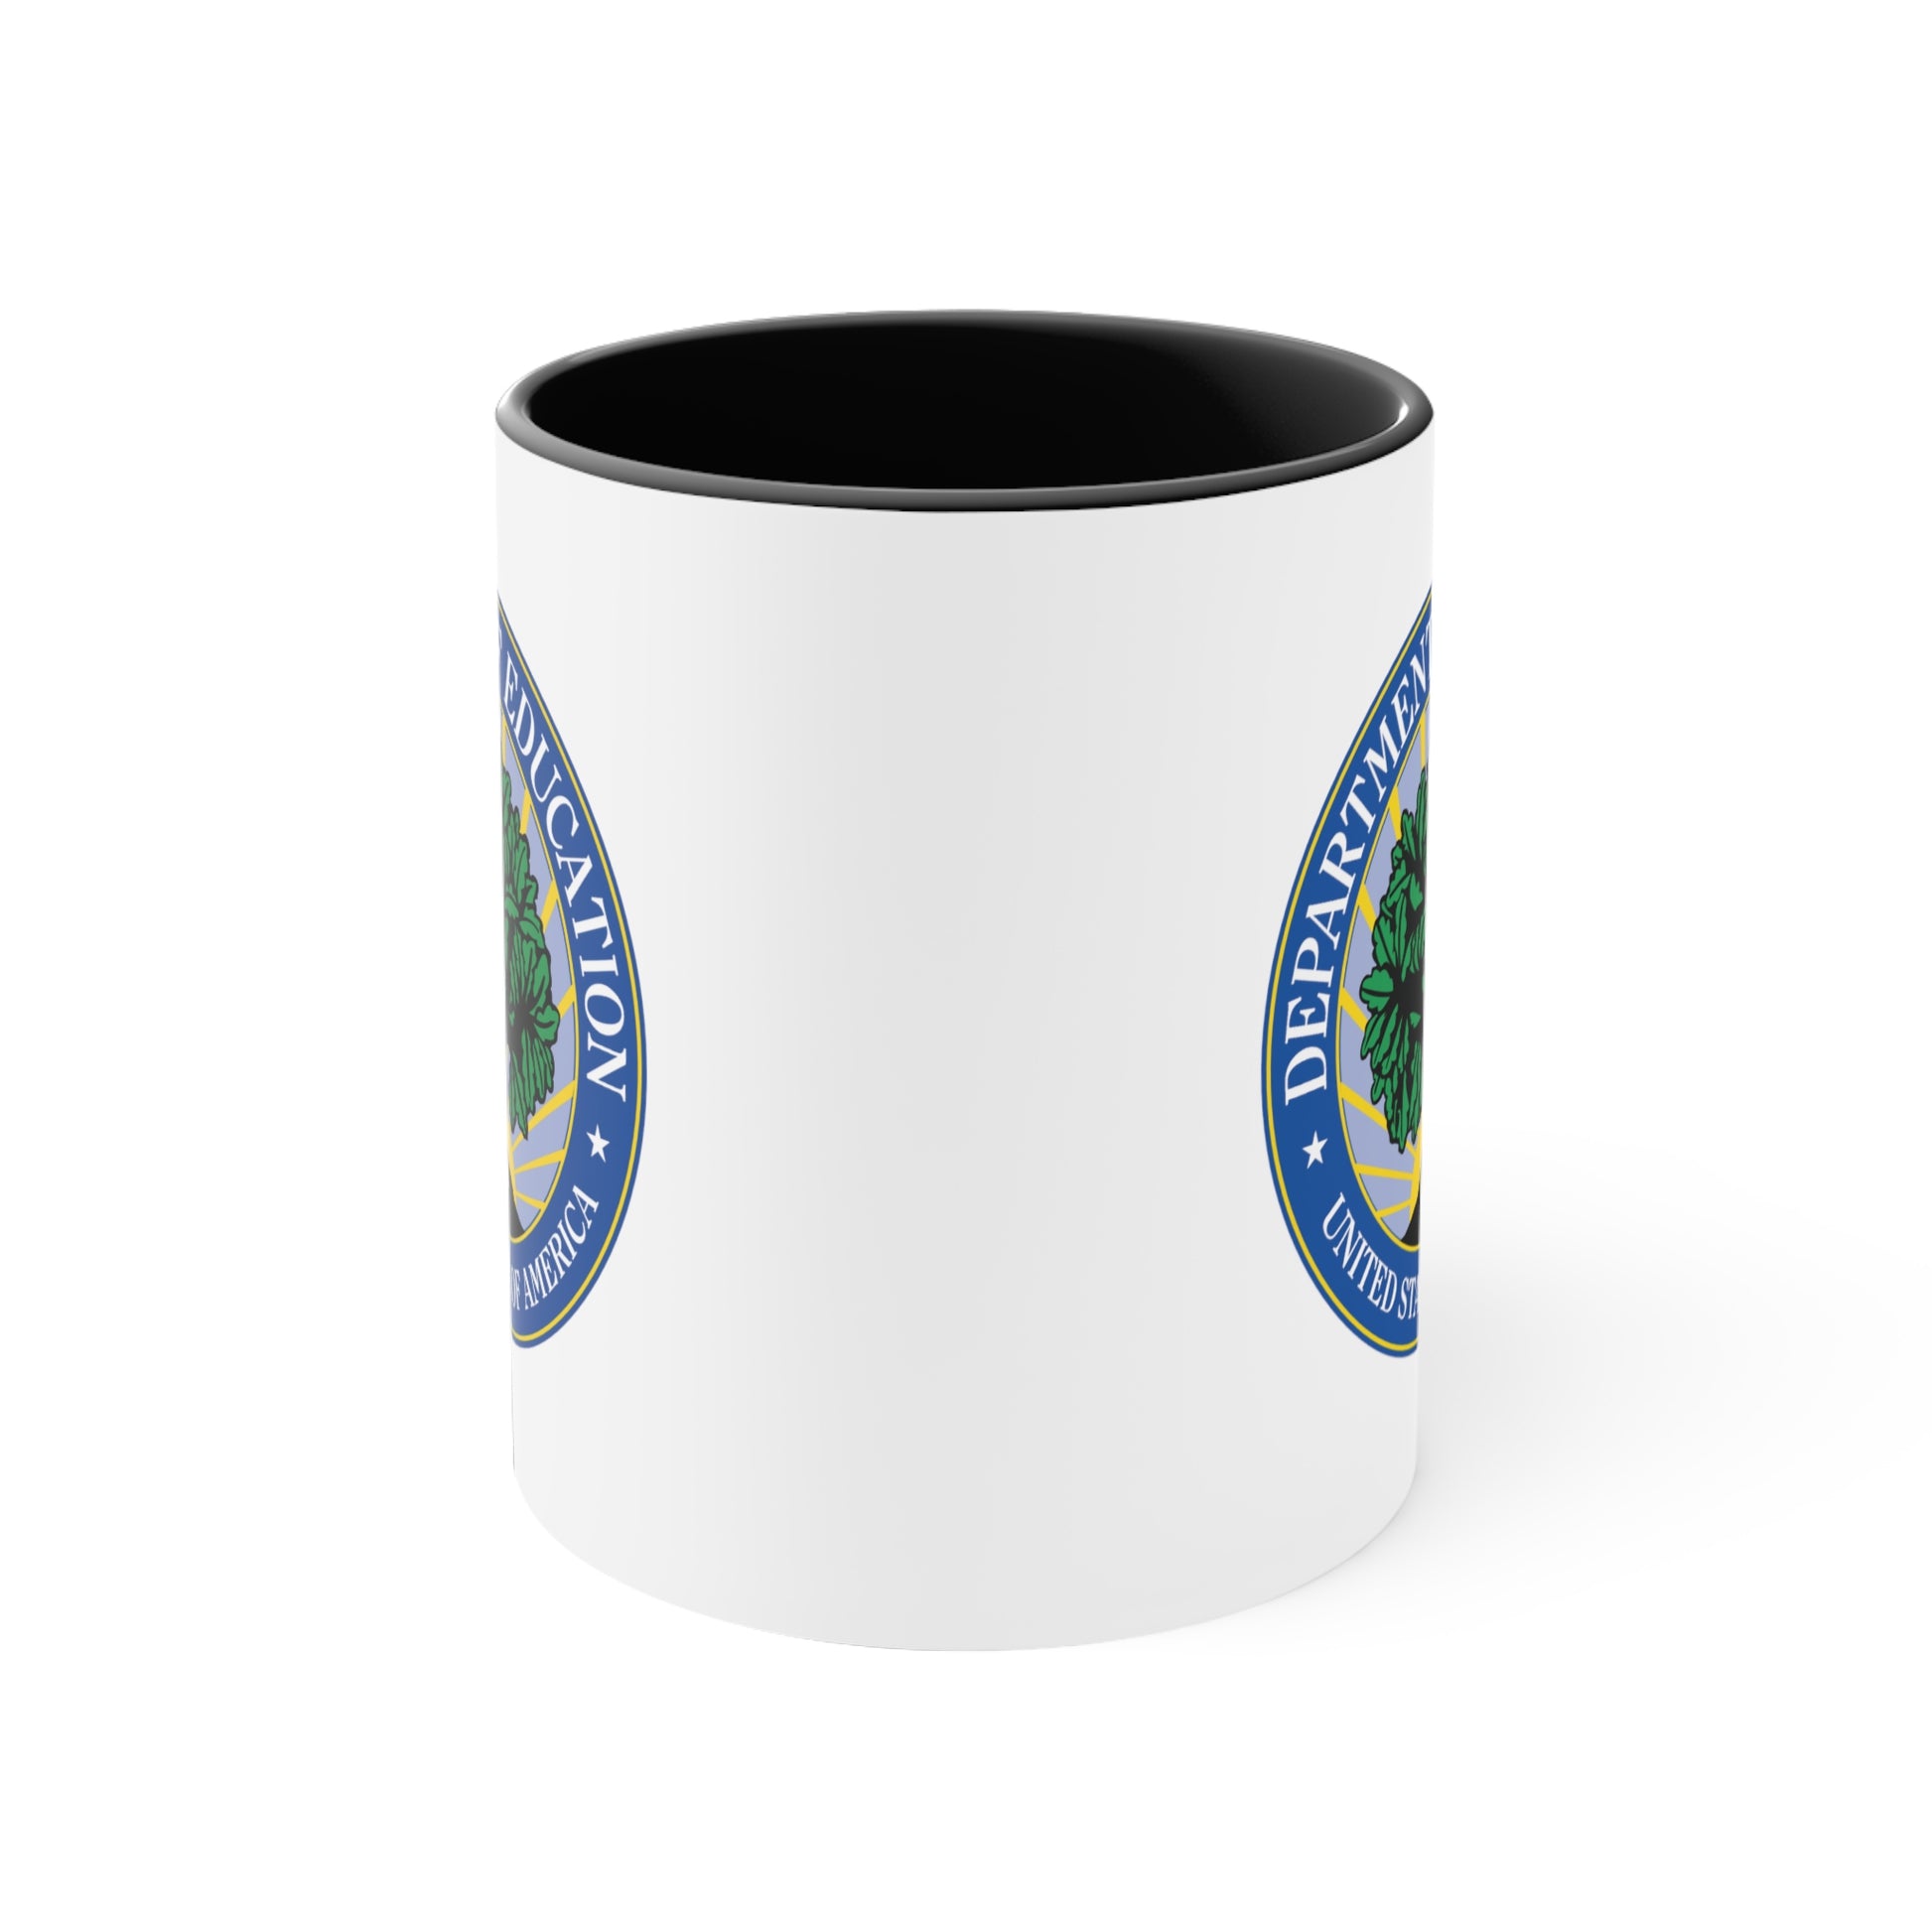 Department of Education Coffee Mug - Double Sided Black Accent White Ceramic 11oz by TheGlassyLass.com